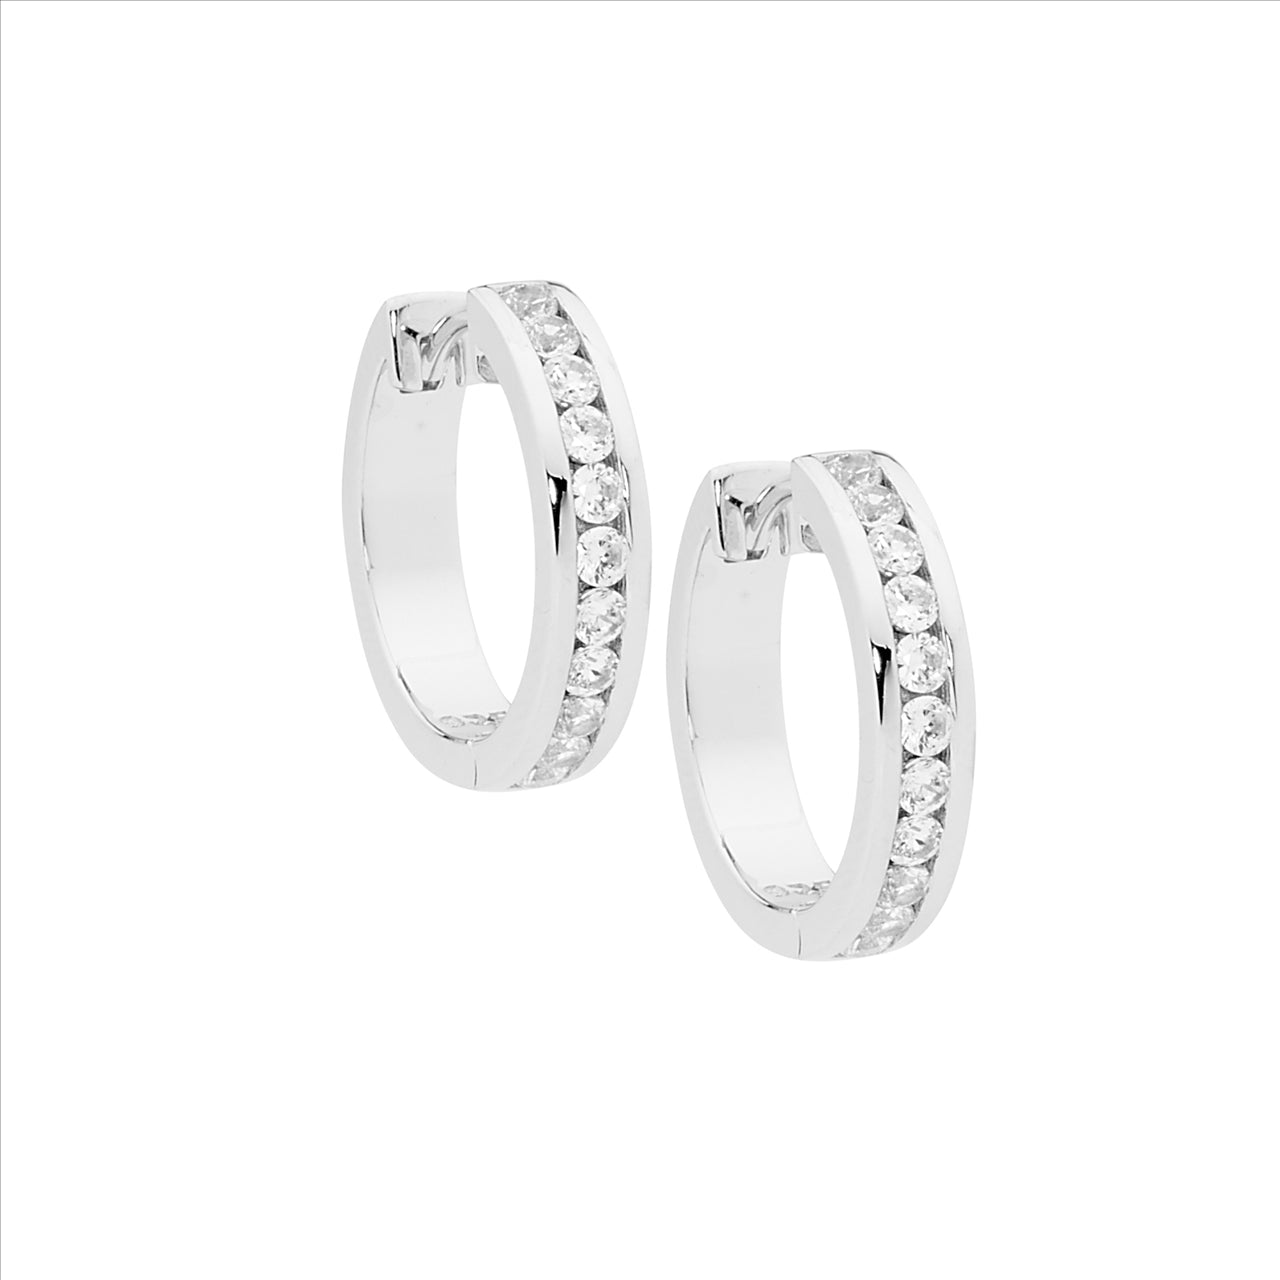 Sterling Silver Channel Set 18mm Hoop Earrings With White Cubic Zirconia's